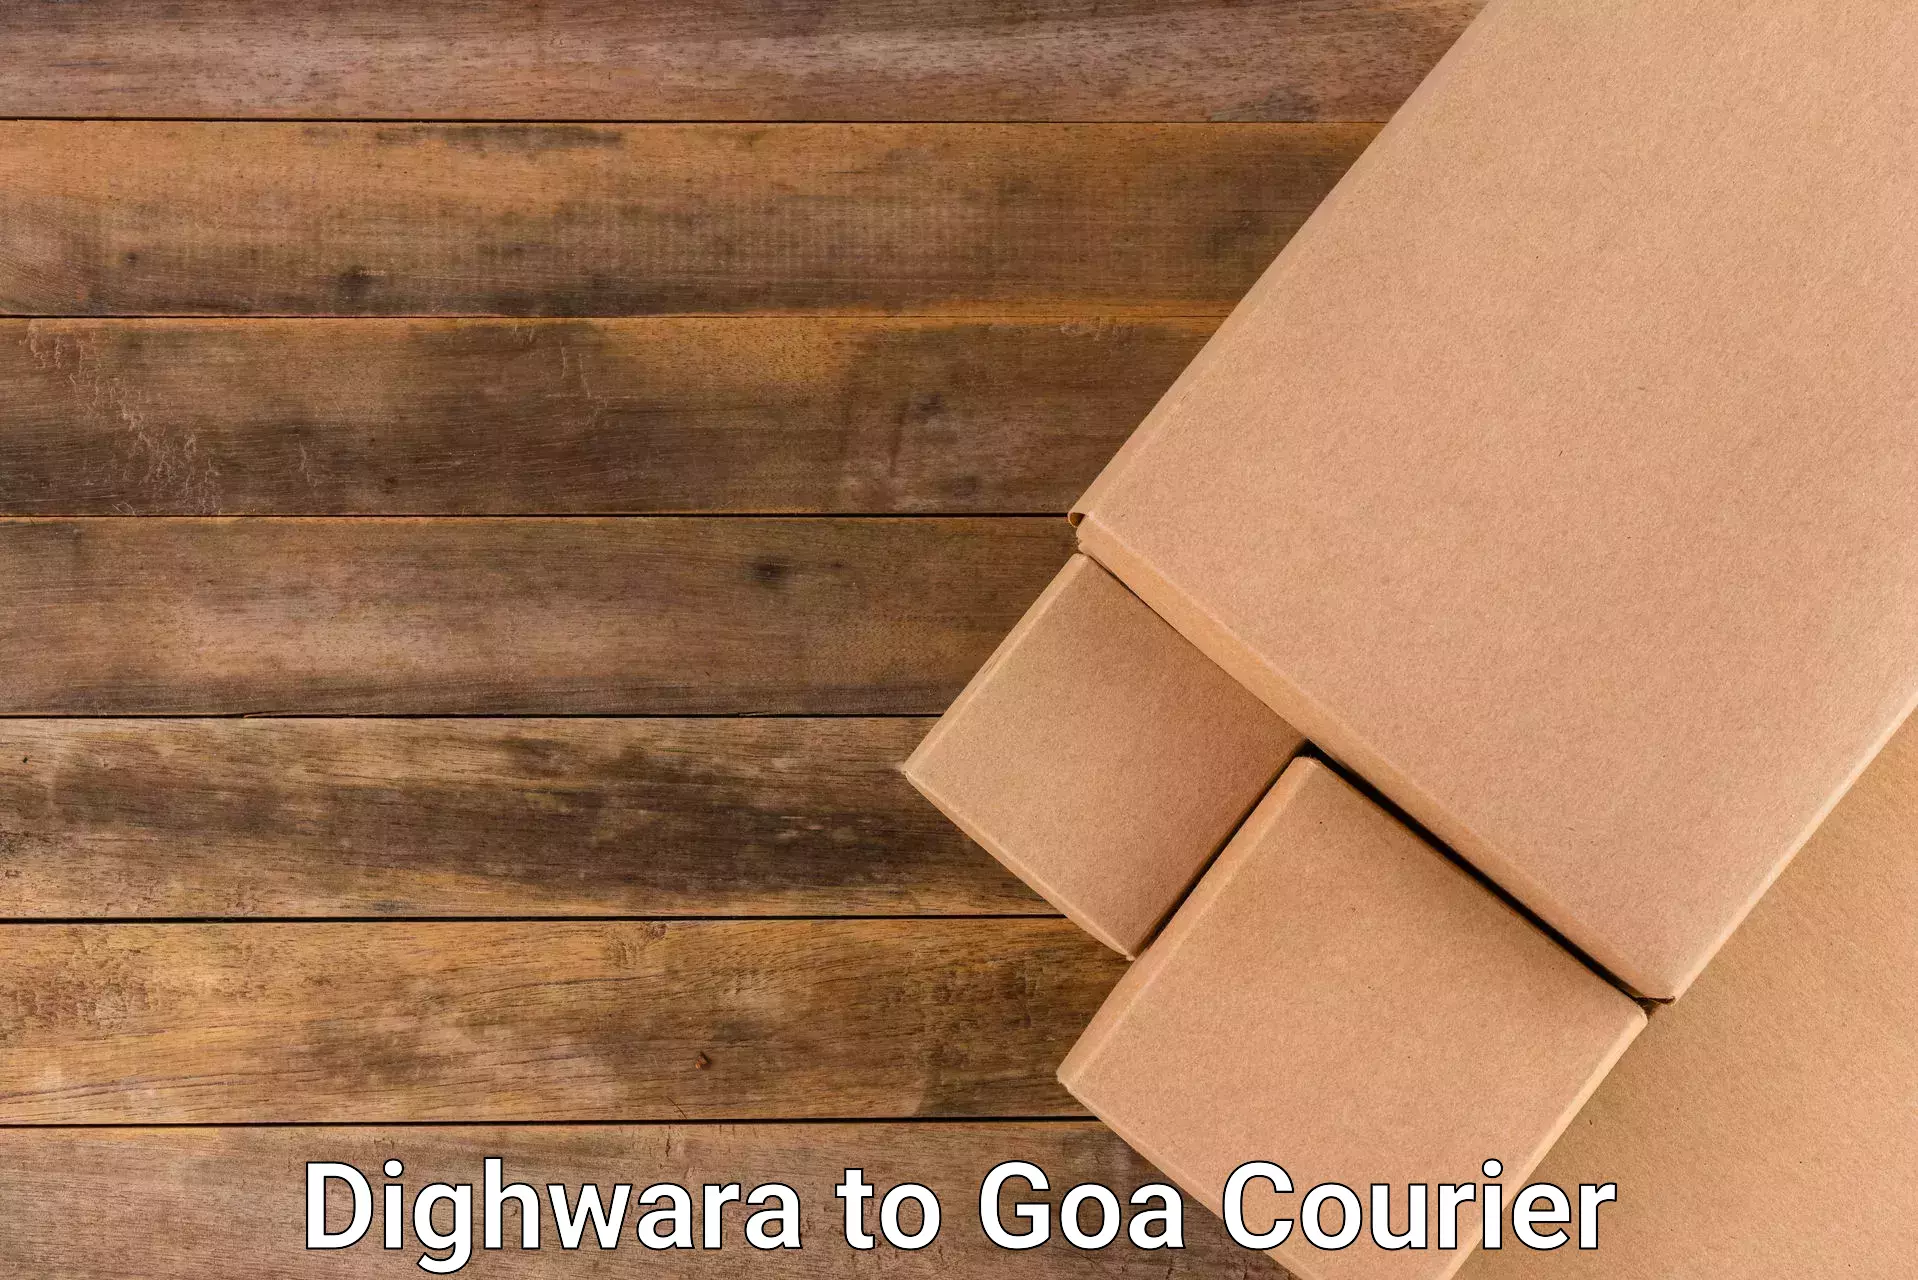 Business delivery service Dighwara to Bardez